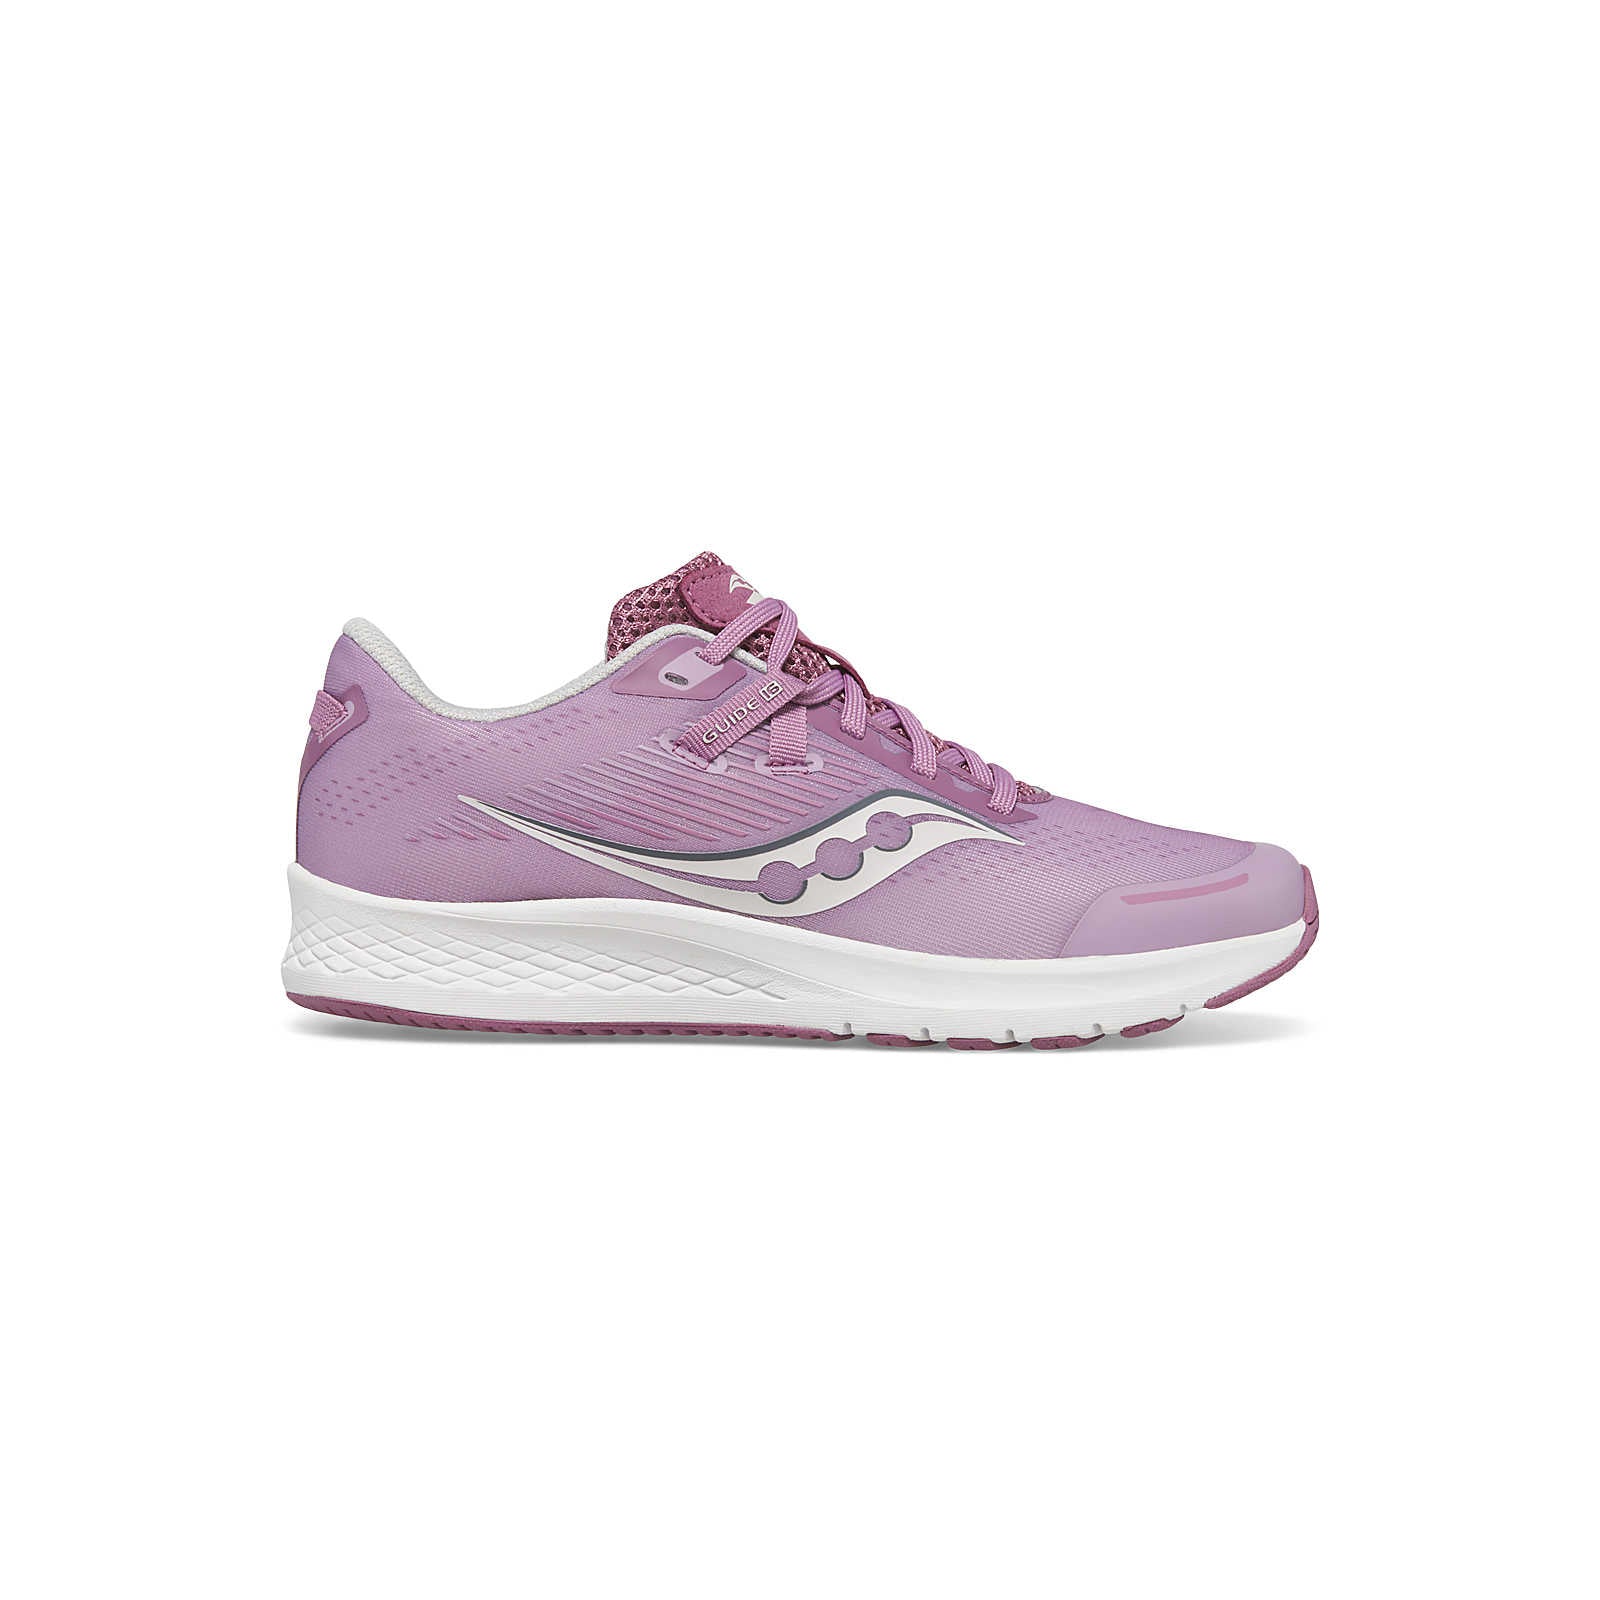 SAUCONY KID'S GUIDE 16 - ORCHID 1.0